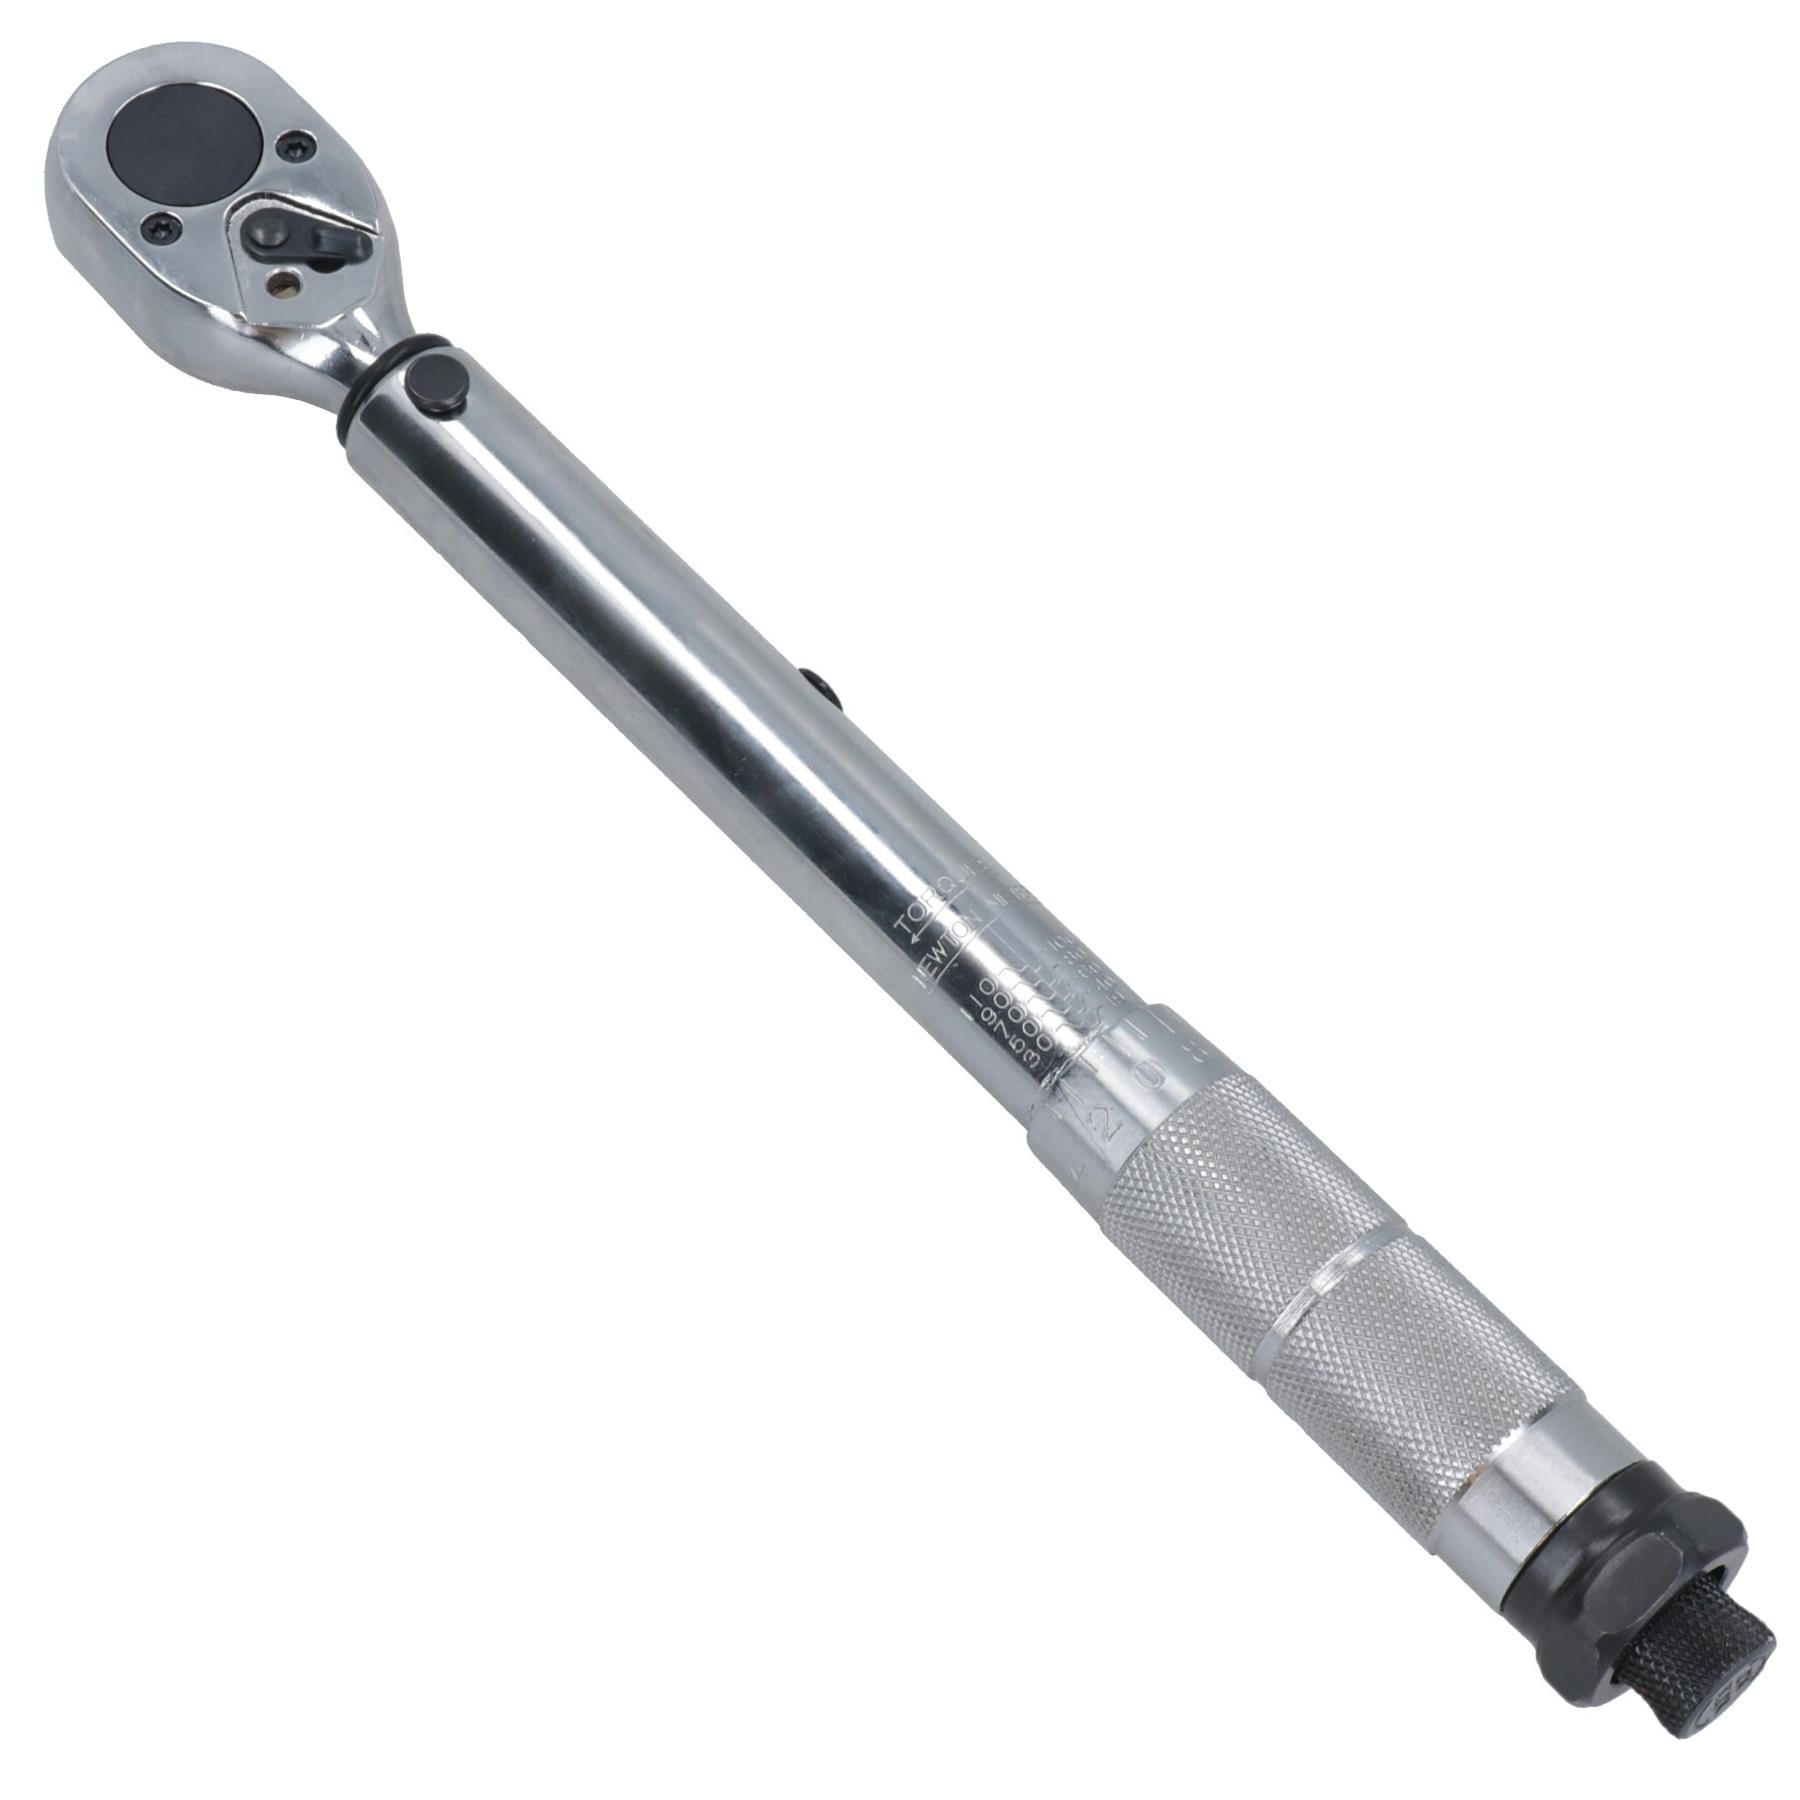 3/8" drive click torque wrench 19 - 110Nm / 15- 81 ft/lbs by U.S.PRO TOOLS AT477